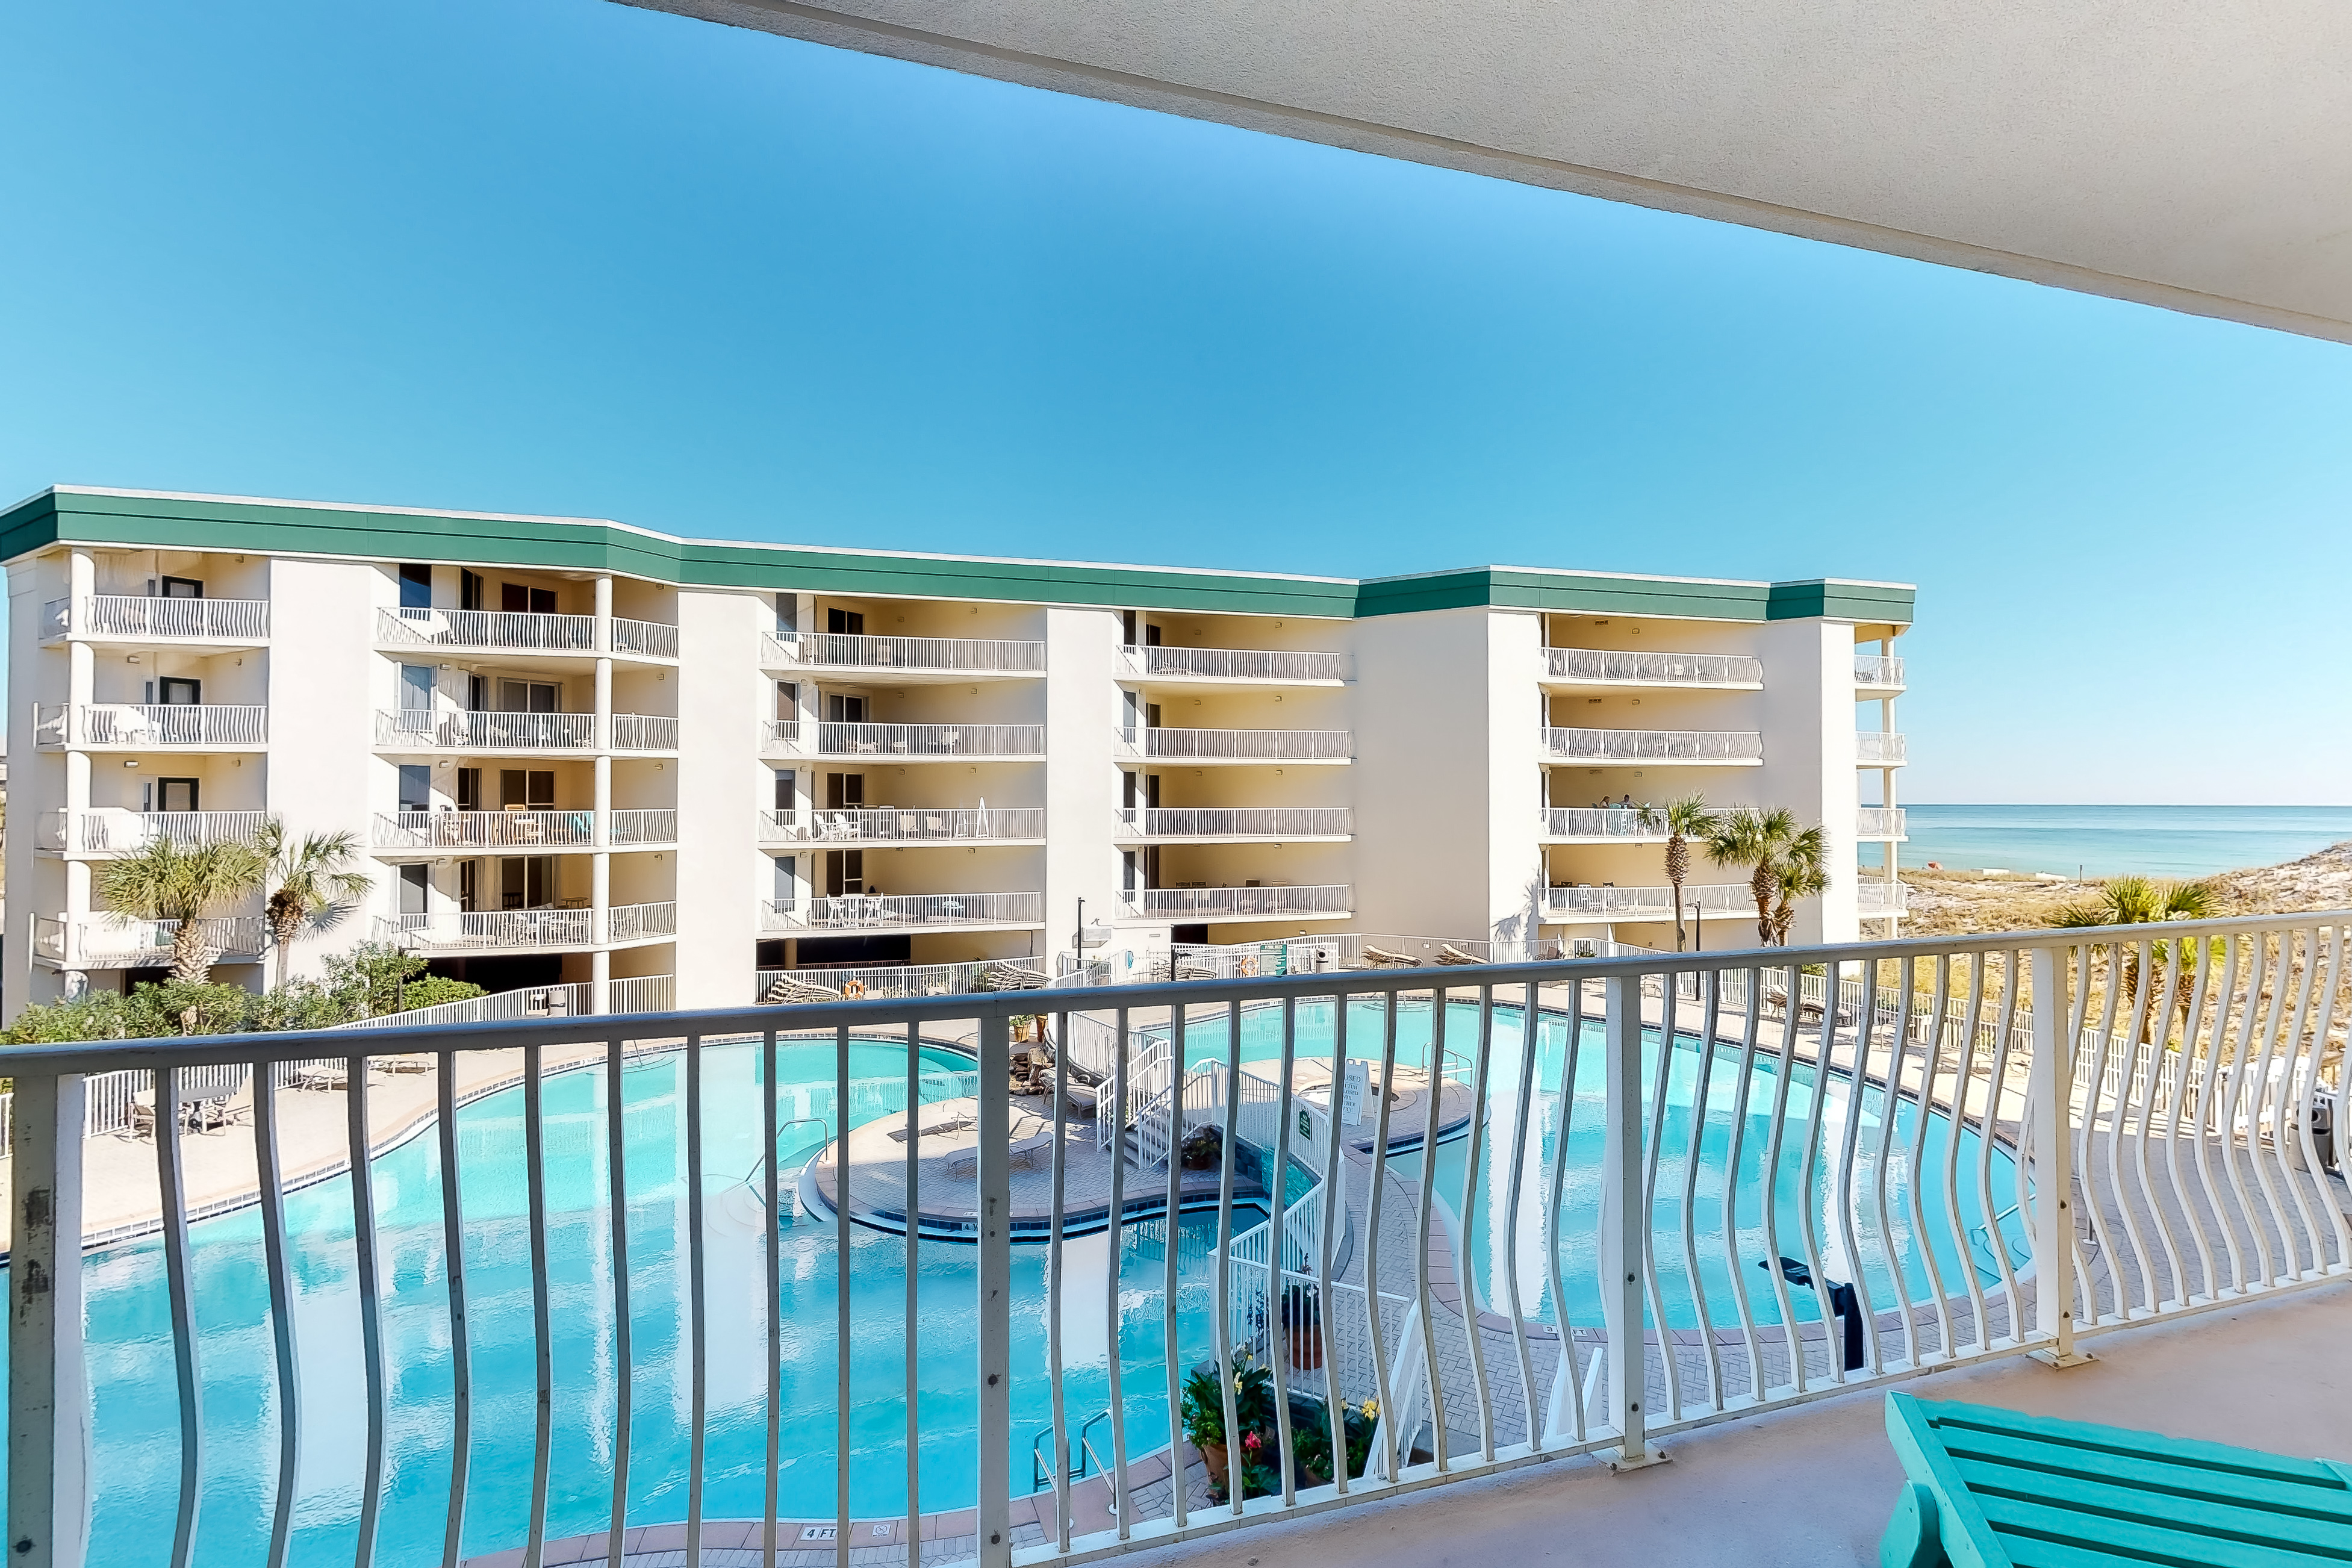 Dunes of Seagrove B202 Condo rental in Dunes of Seagrove in Highway 30-A Florida - #16